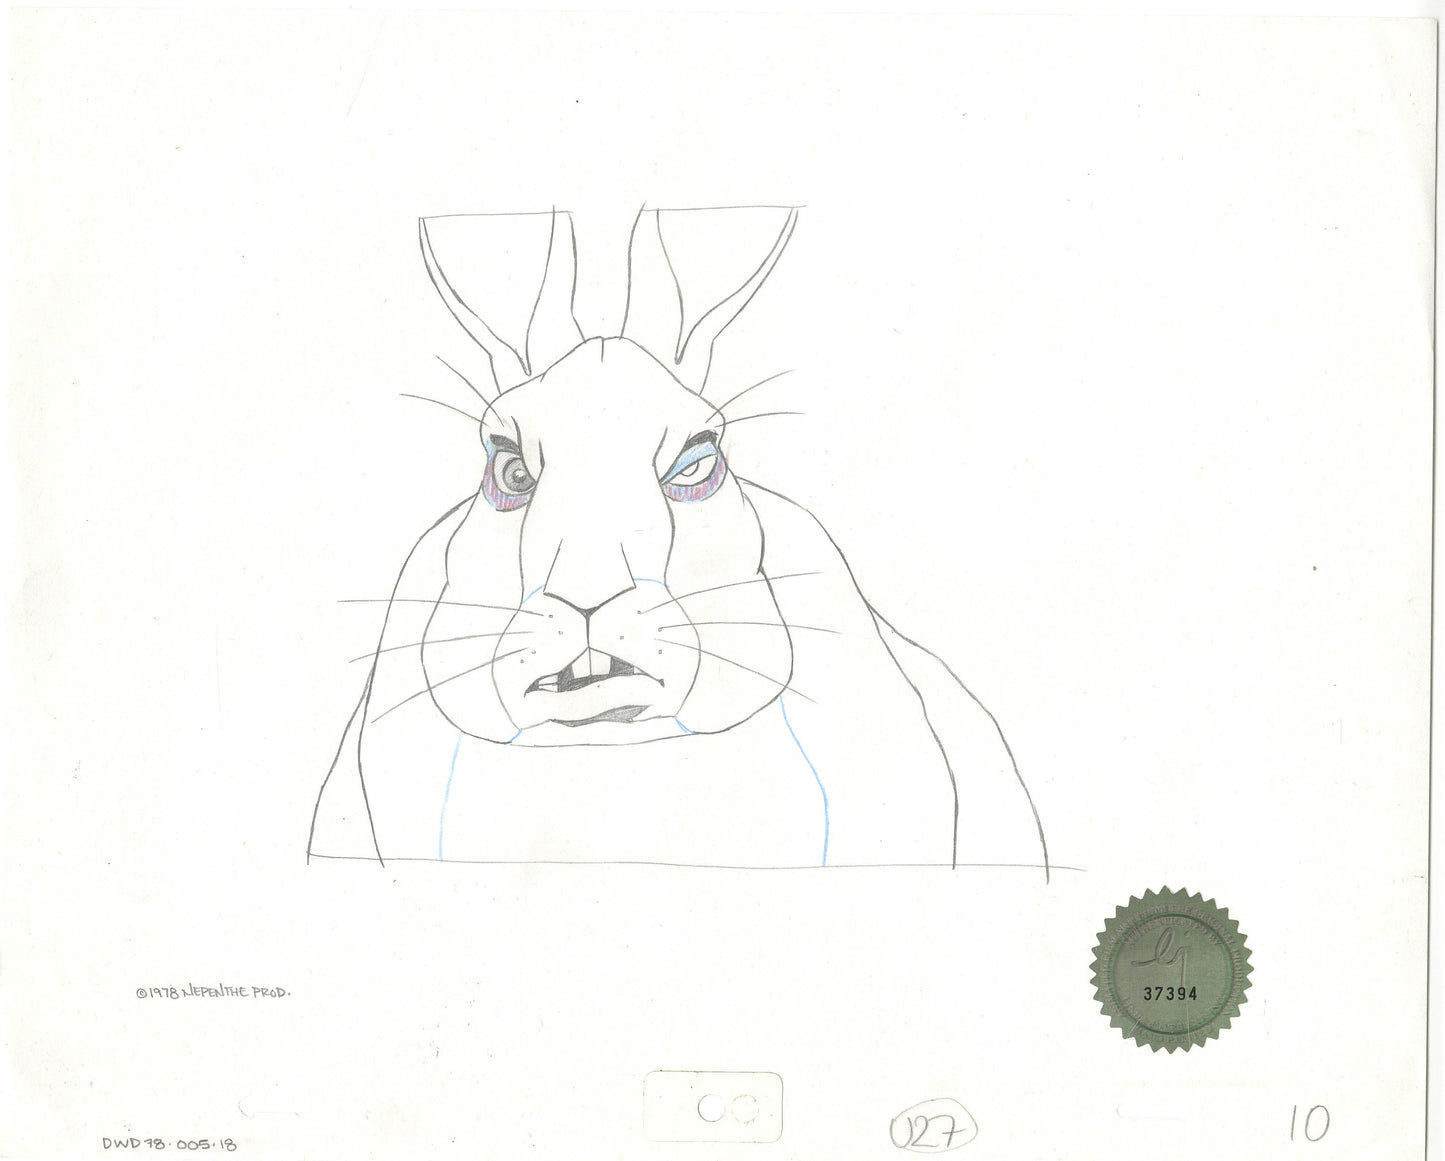 Watership Down 1978 Production Animation Cel Drawing of Woundort with Linda Jones Enterprise Seal and Certificate of Authenticity 005-018